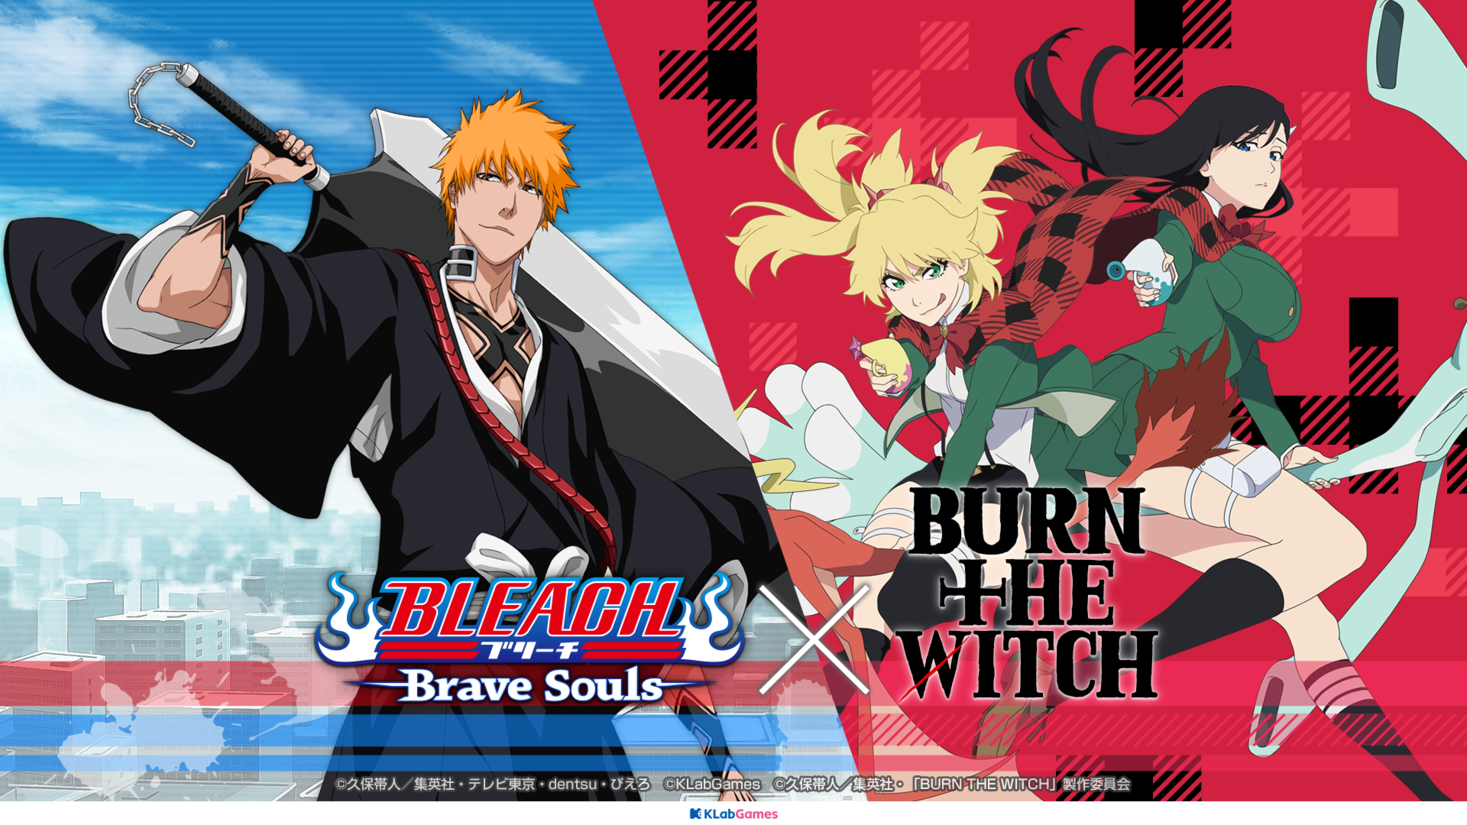 BLEACH Brave Souls』×『BURN THE WITCH』コラボイベントを開催